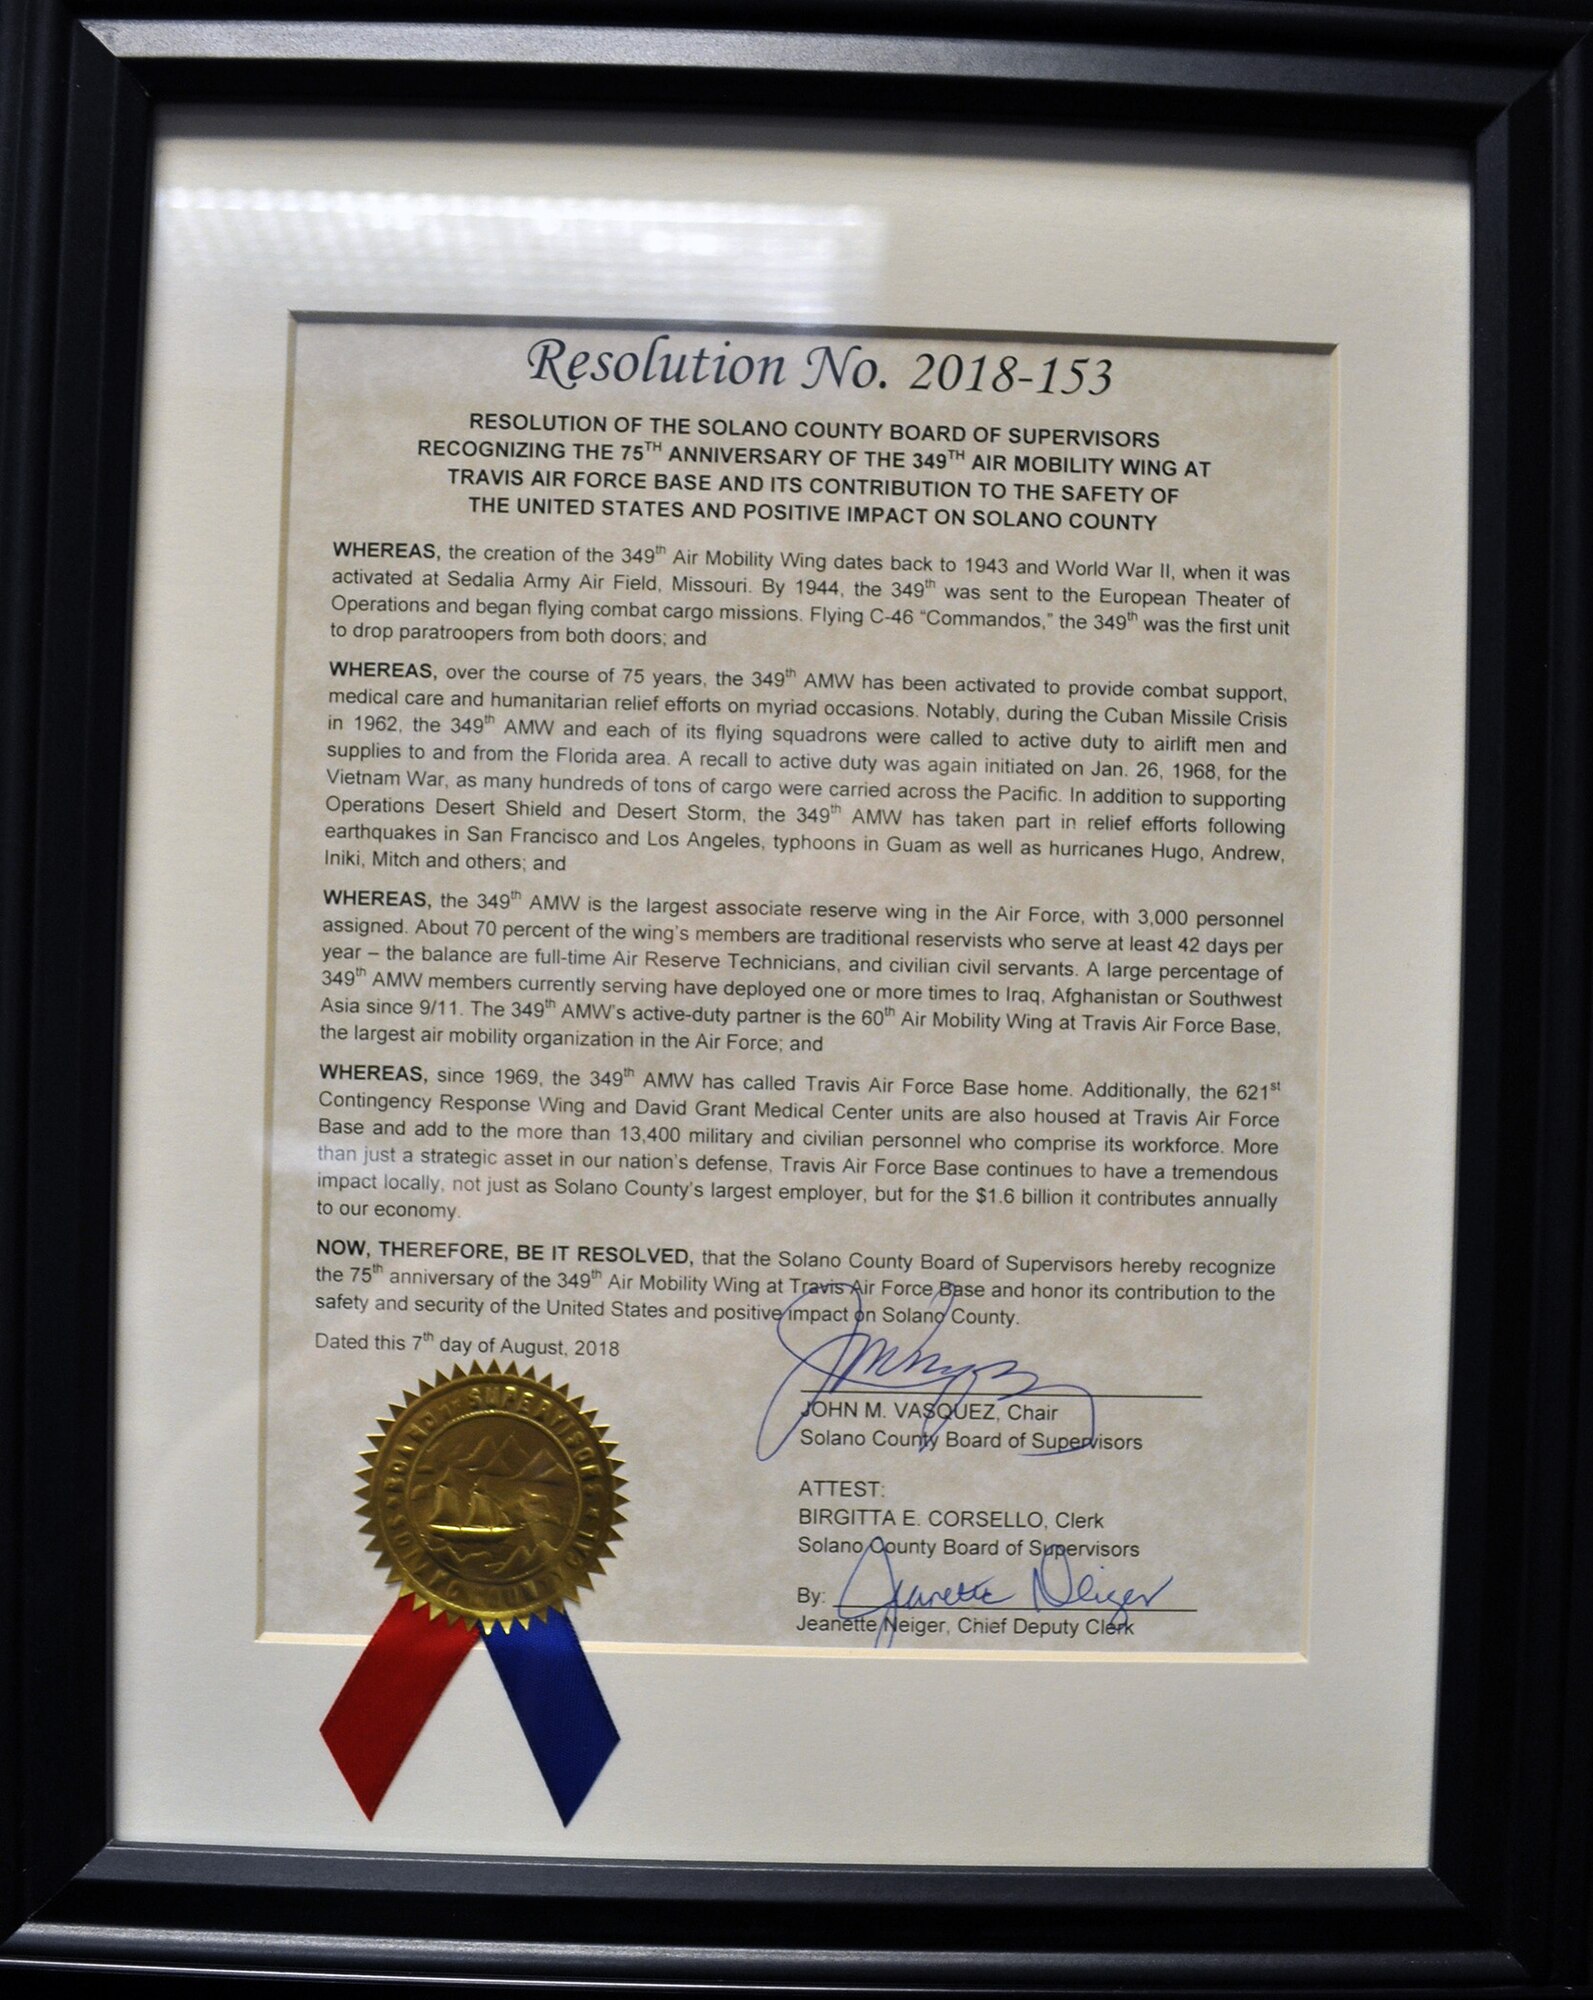 The Solano County Board of Supervisors honored the 349th Air Mobility Wing August 7, 2018.